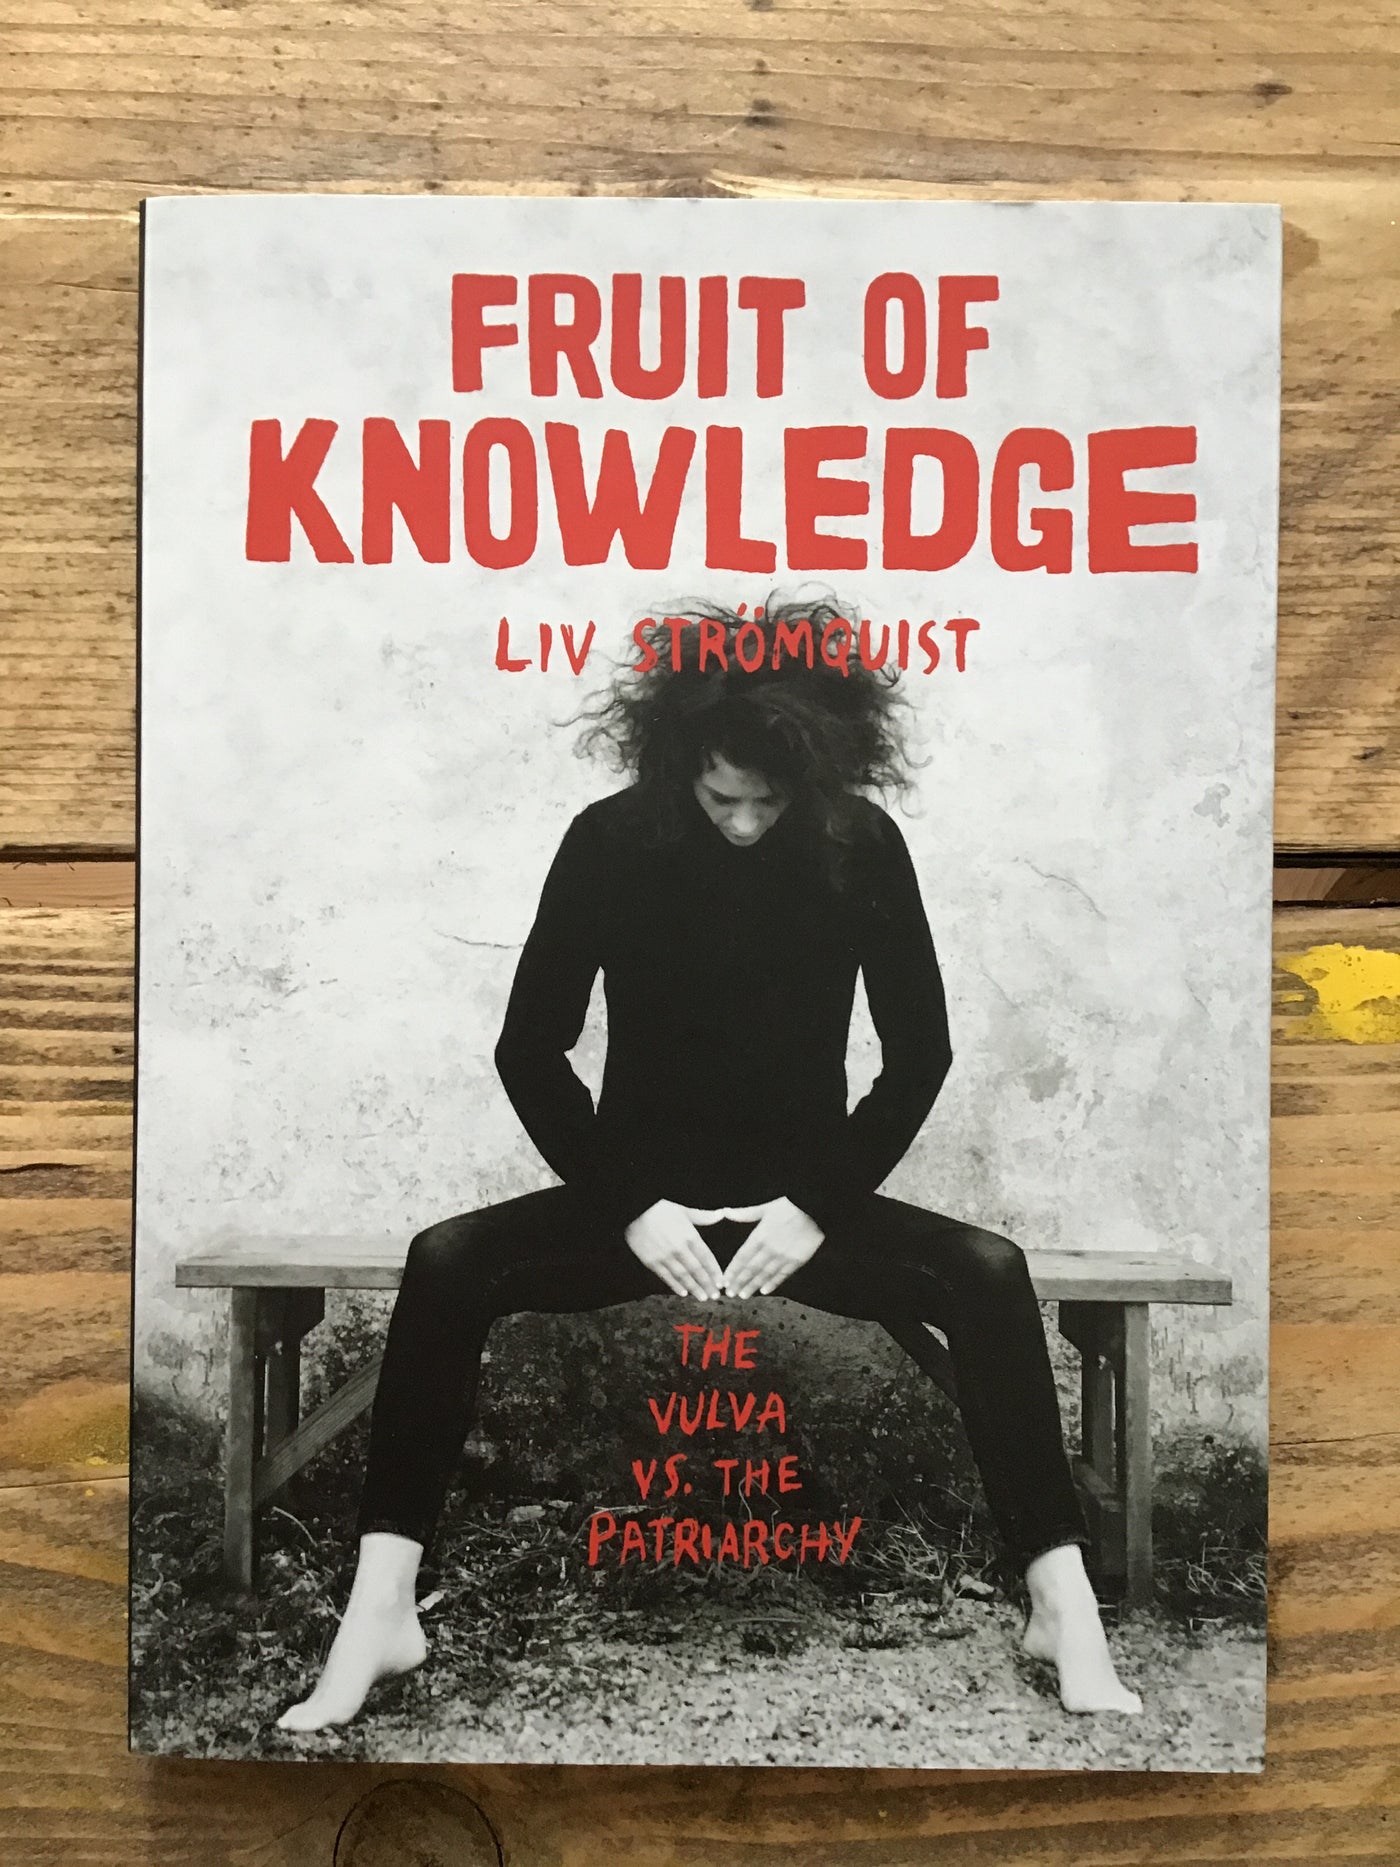 Fruit of Knowledge